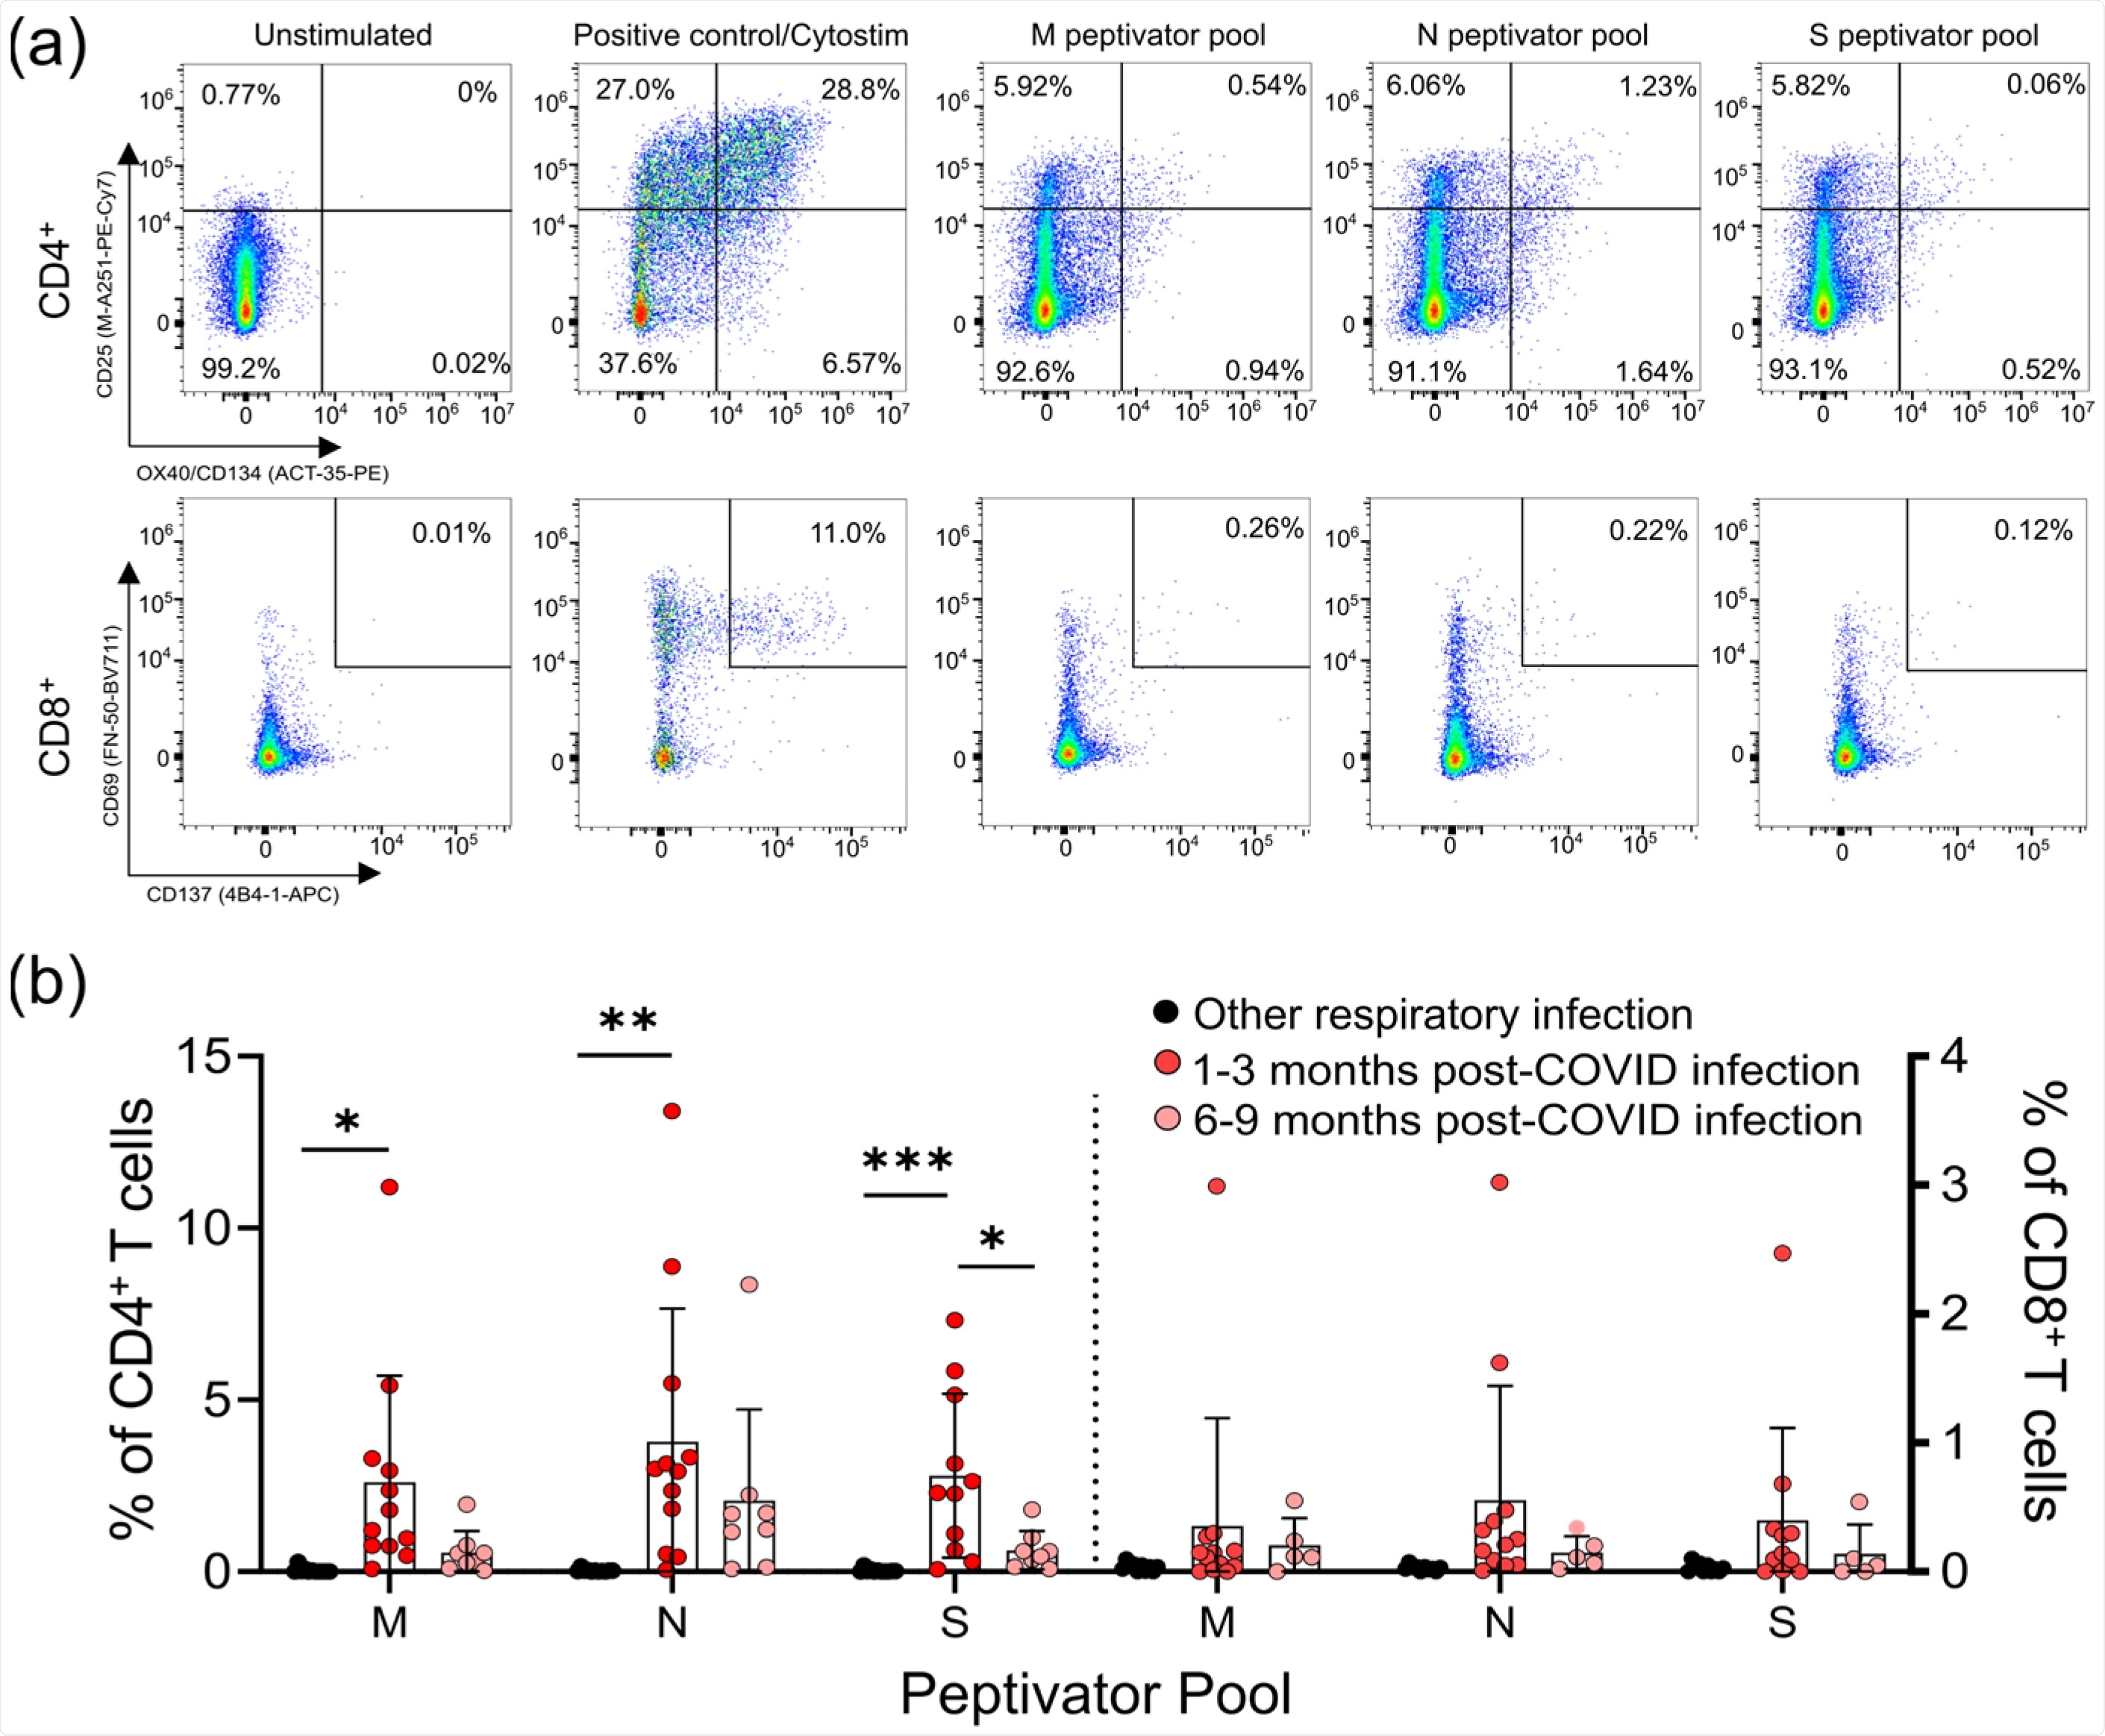 CD4+ and CD8+ T-cell responses to the M, N, and S peptide pools after mild SARS-CoV-2 infection. (a) The number of SARS-CoV-2-specific T-cells is measured as a percent of CD4+ T-cells expressing both CD25 and OX40, or CD8+ T-cells expressing both CD69 and CD137, after activation with the S, M, or N peptide pools 1–3 months and 6–9 months after infection. The polyclonal activator Cytostim is used as a positive control. (b) All COVID-19 seropositive participants had an increase in CD25+OX40+CD4+ T-cells in response to at least one of the M, N, or S antigens 1–3 months after mild COVID-19 infection, compared to seronegative individuals recovered from other mild respiratory infections. Each participant is indicated by a single data point: other respiratory infection n = 11; 1–3 months post COVID-19 infection n = 11; 6–9 months post COVID-19 infection n = 8. Multiple group comparisons were tested using Welch’s One-Way ANOVA and the Games–Howell post-hoc test; bars represent the mean ± standard deviation. * p < 0.05; ** p < 0.01; *** p < 0.001.